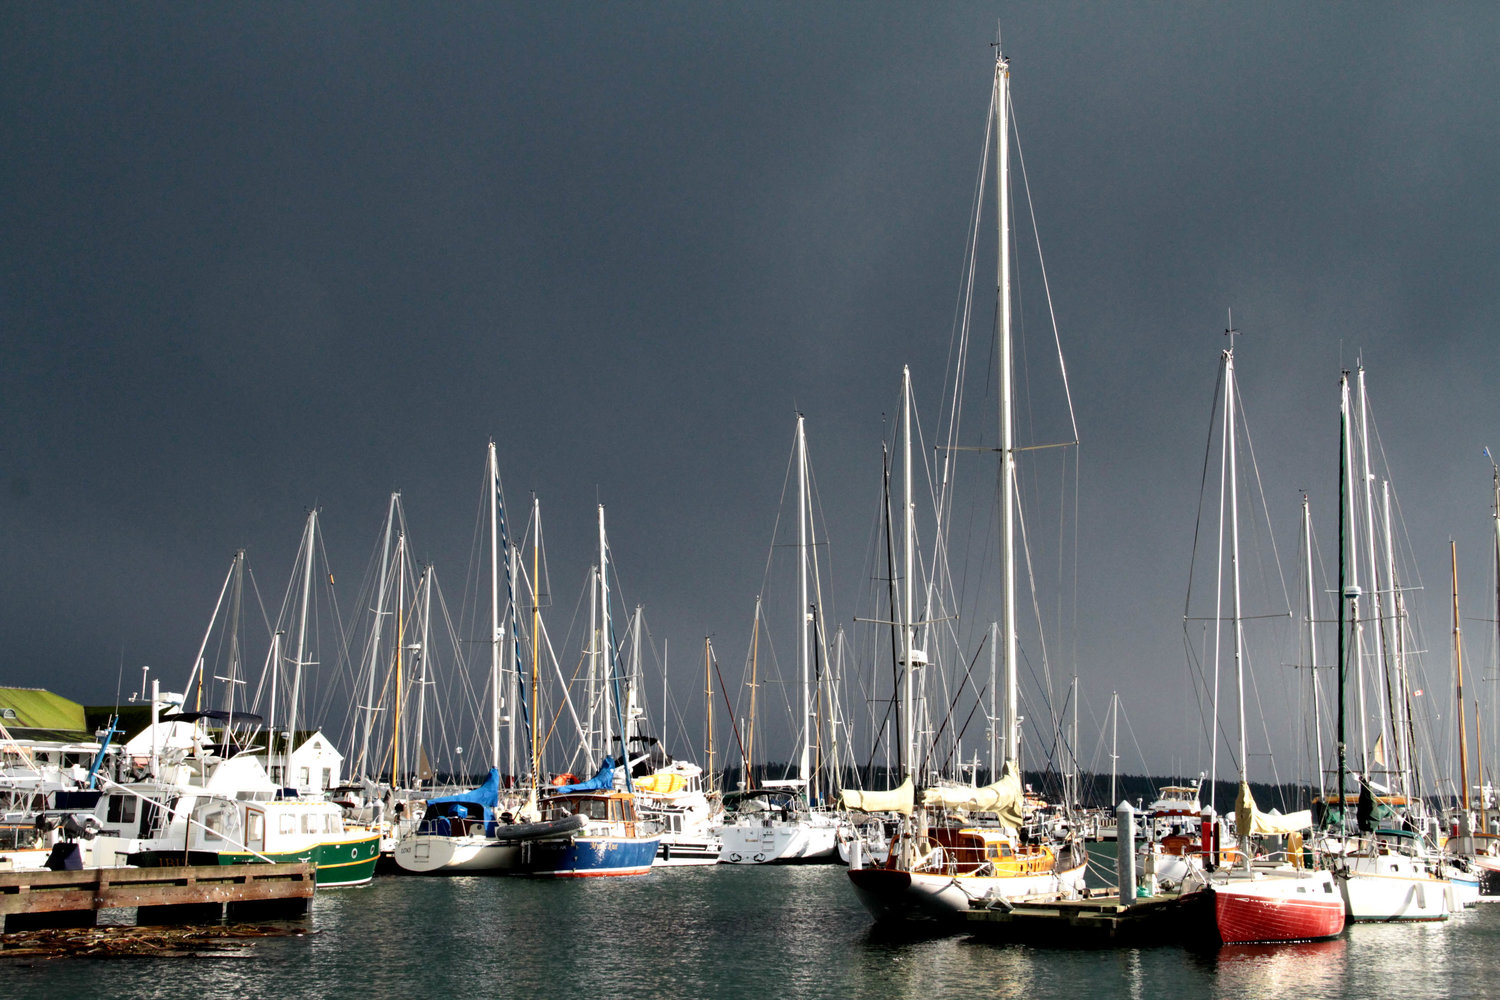 Sailboats at the Point Hudson Marina are lighted by a sun-break in Monday's storm as dark clouds darken Port Townsend Bay.